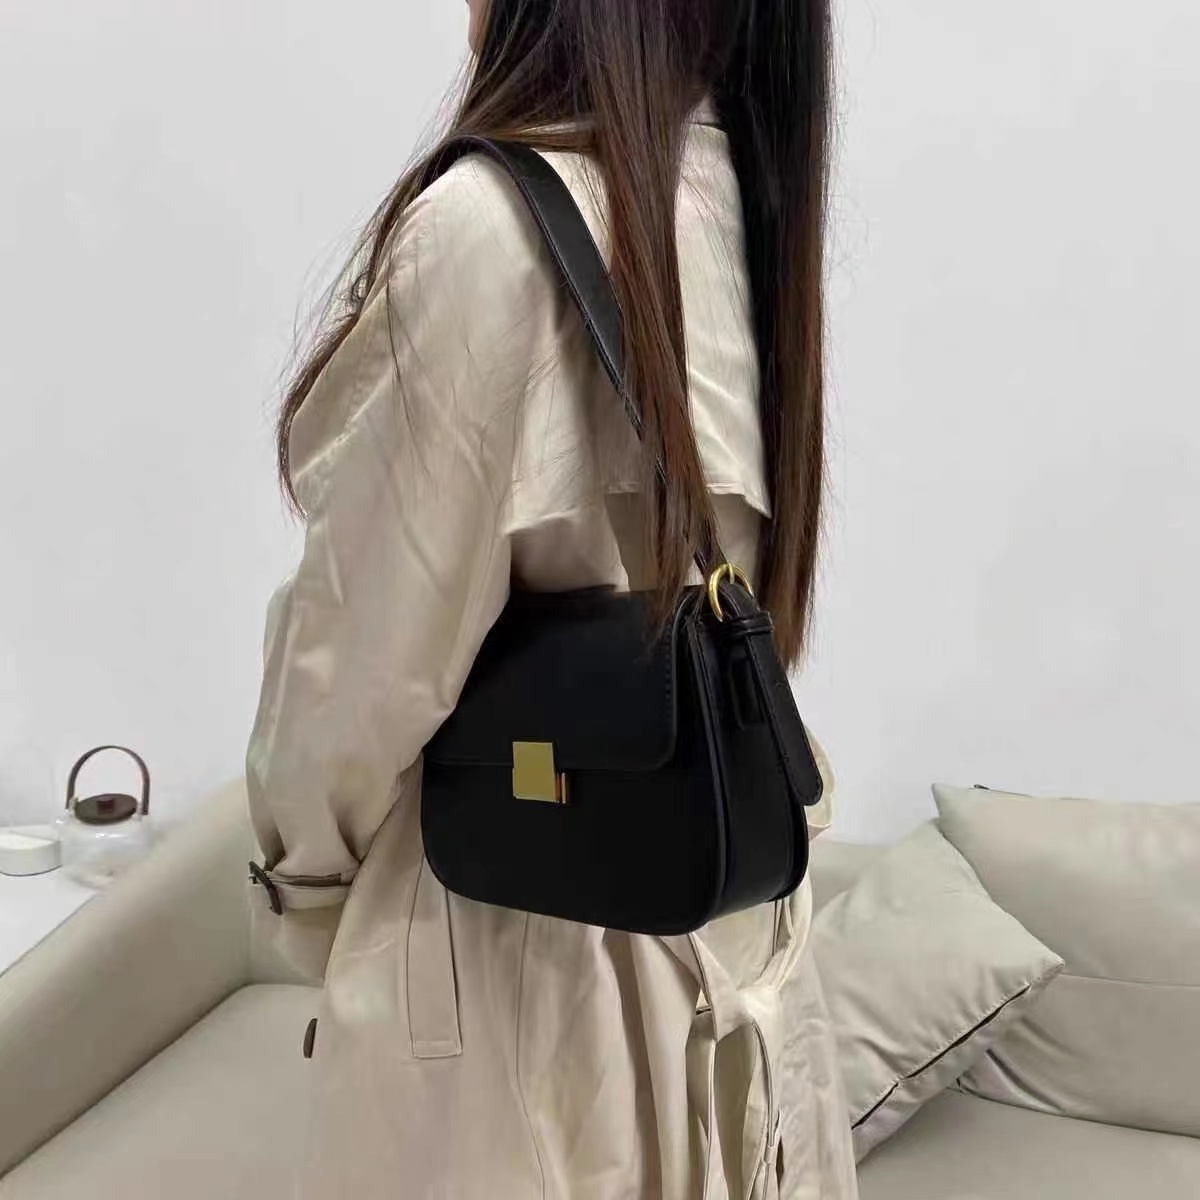 Women's Minimalism Messenger Bags in Genuine Leather photo review